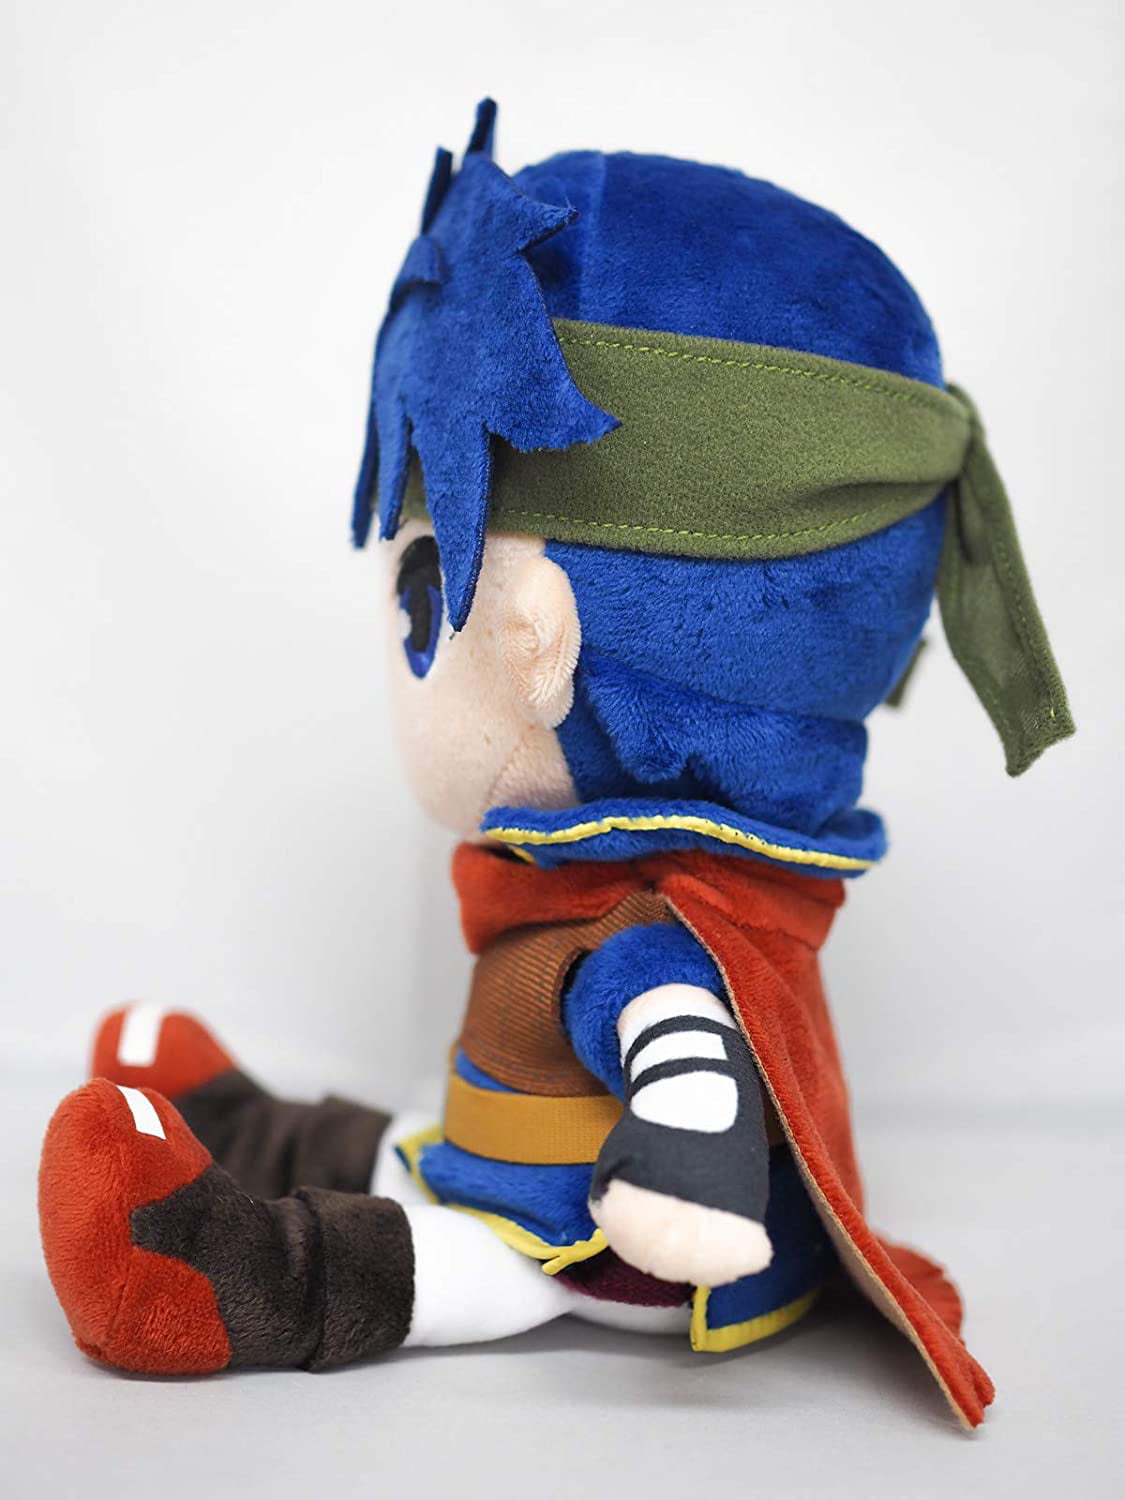 10' Details about   Sanei Fire Emblem All Star Collection FP01 Mars/ Marth Plush